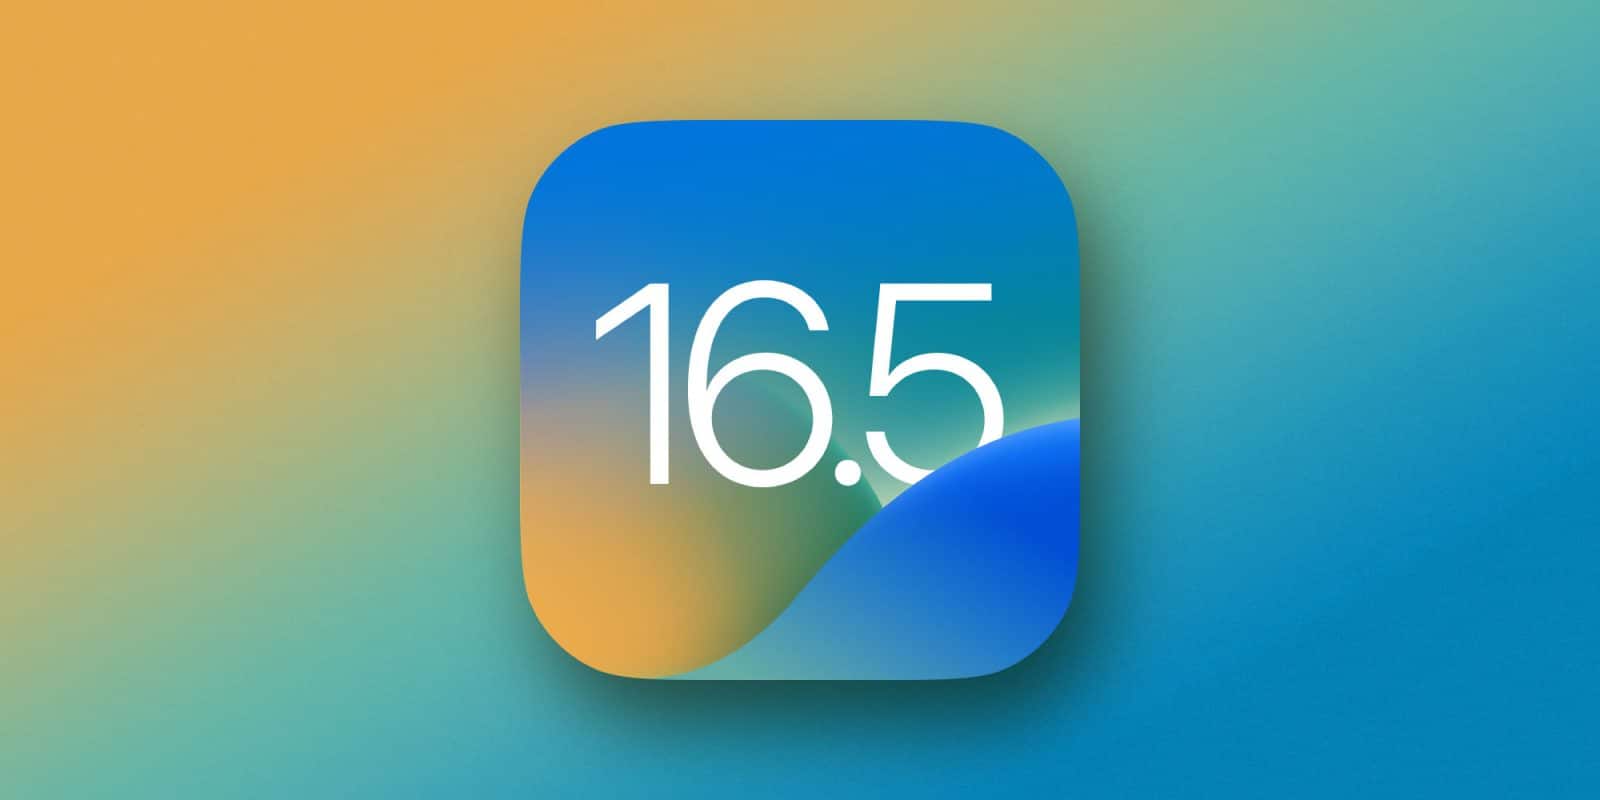 iOS 16.5 Beta 4 is now Available for Developers